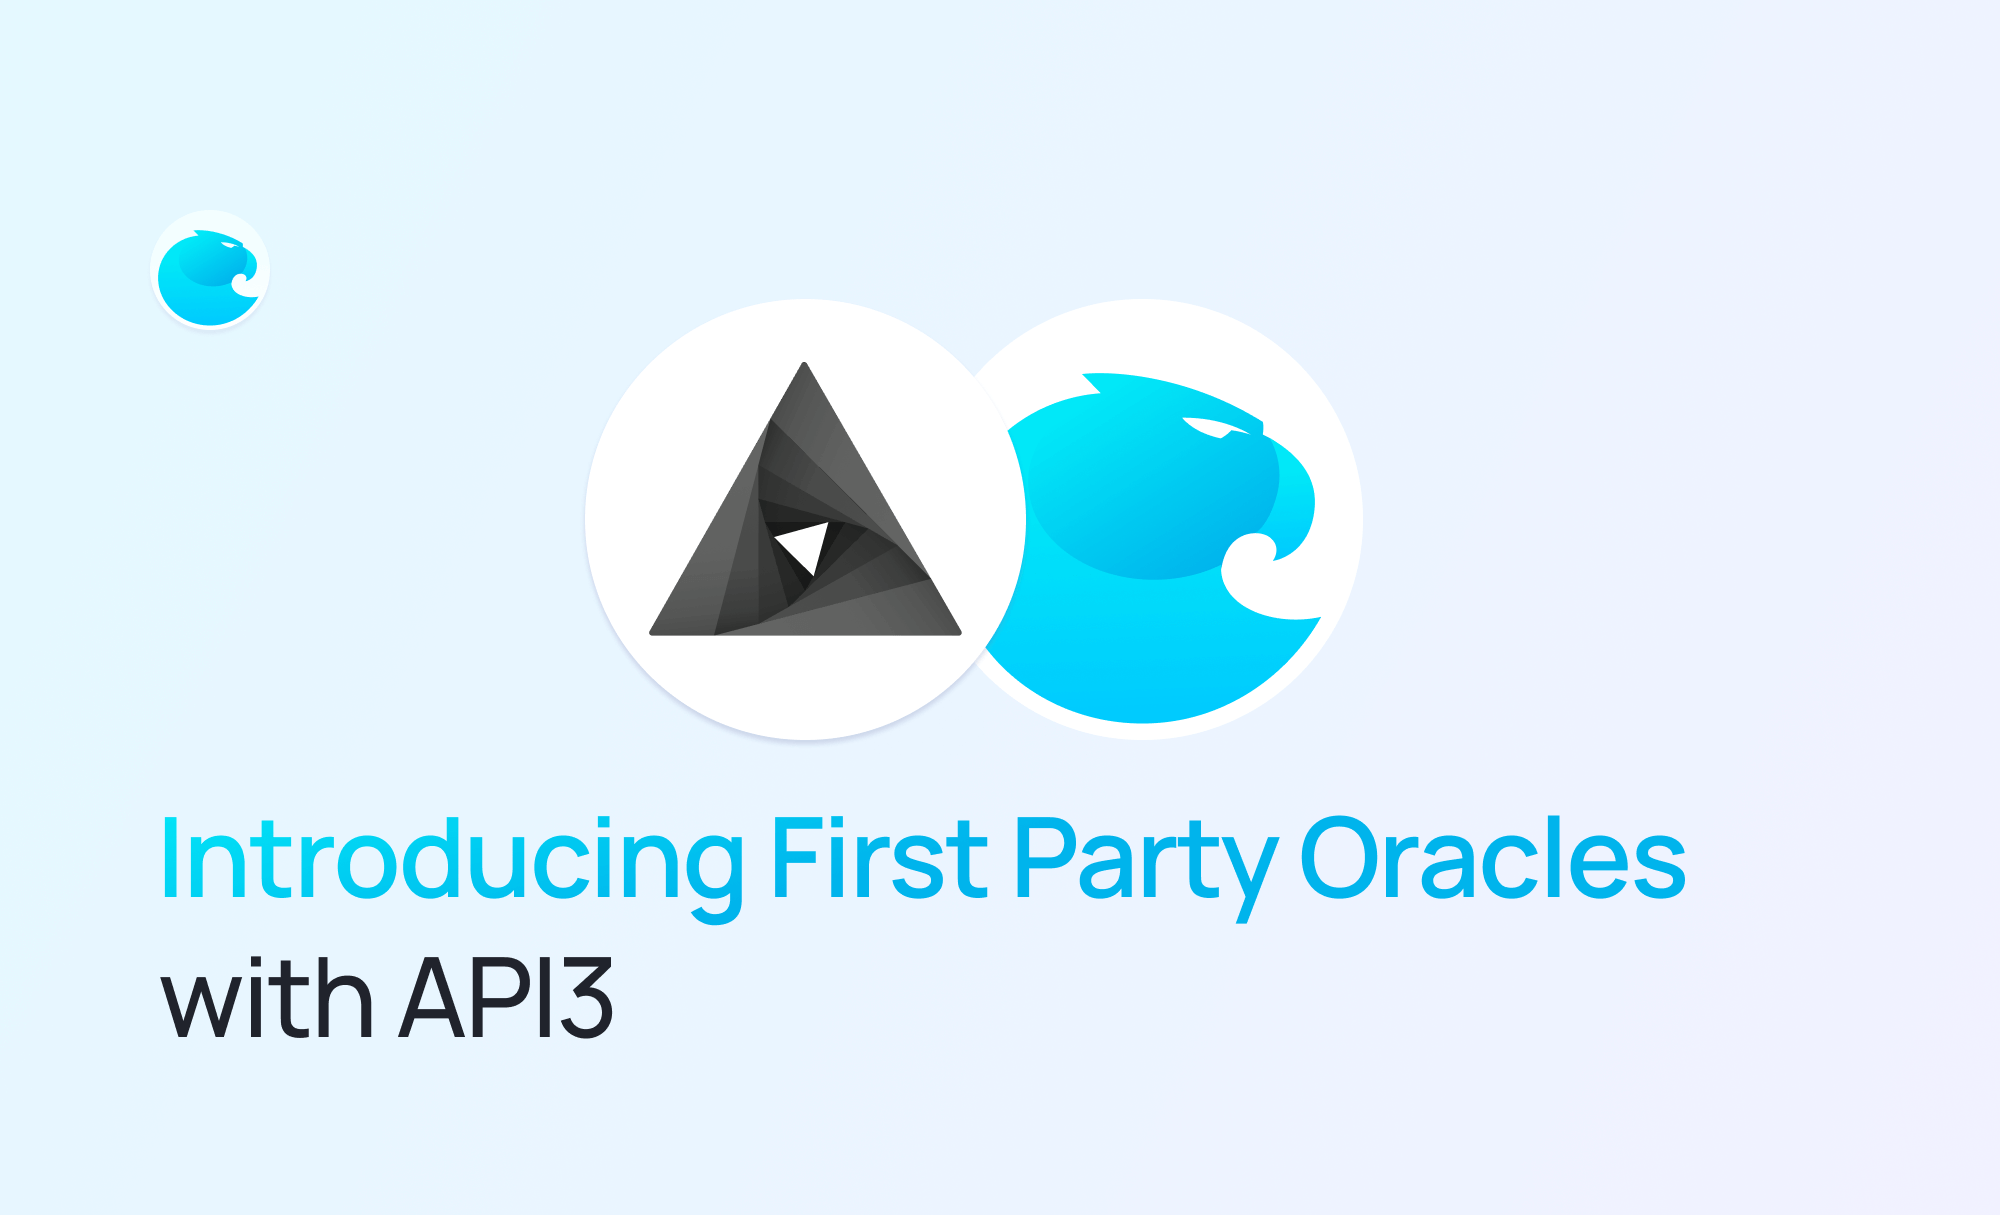 Introducing First Party Oracles with API3